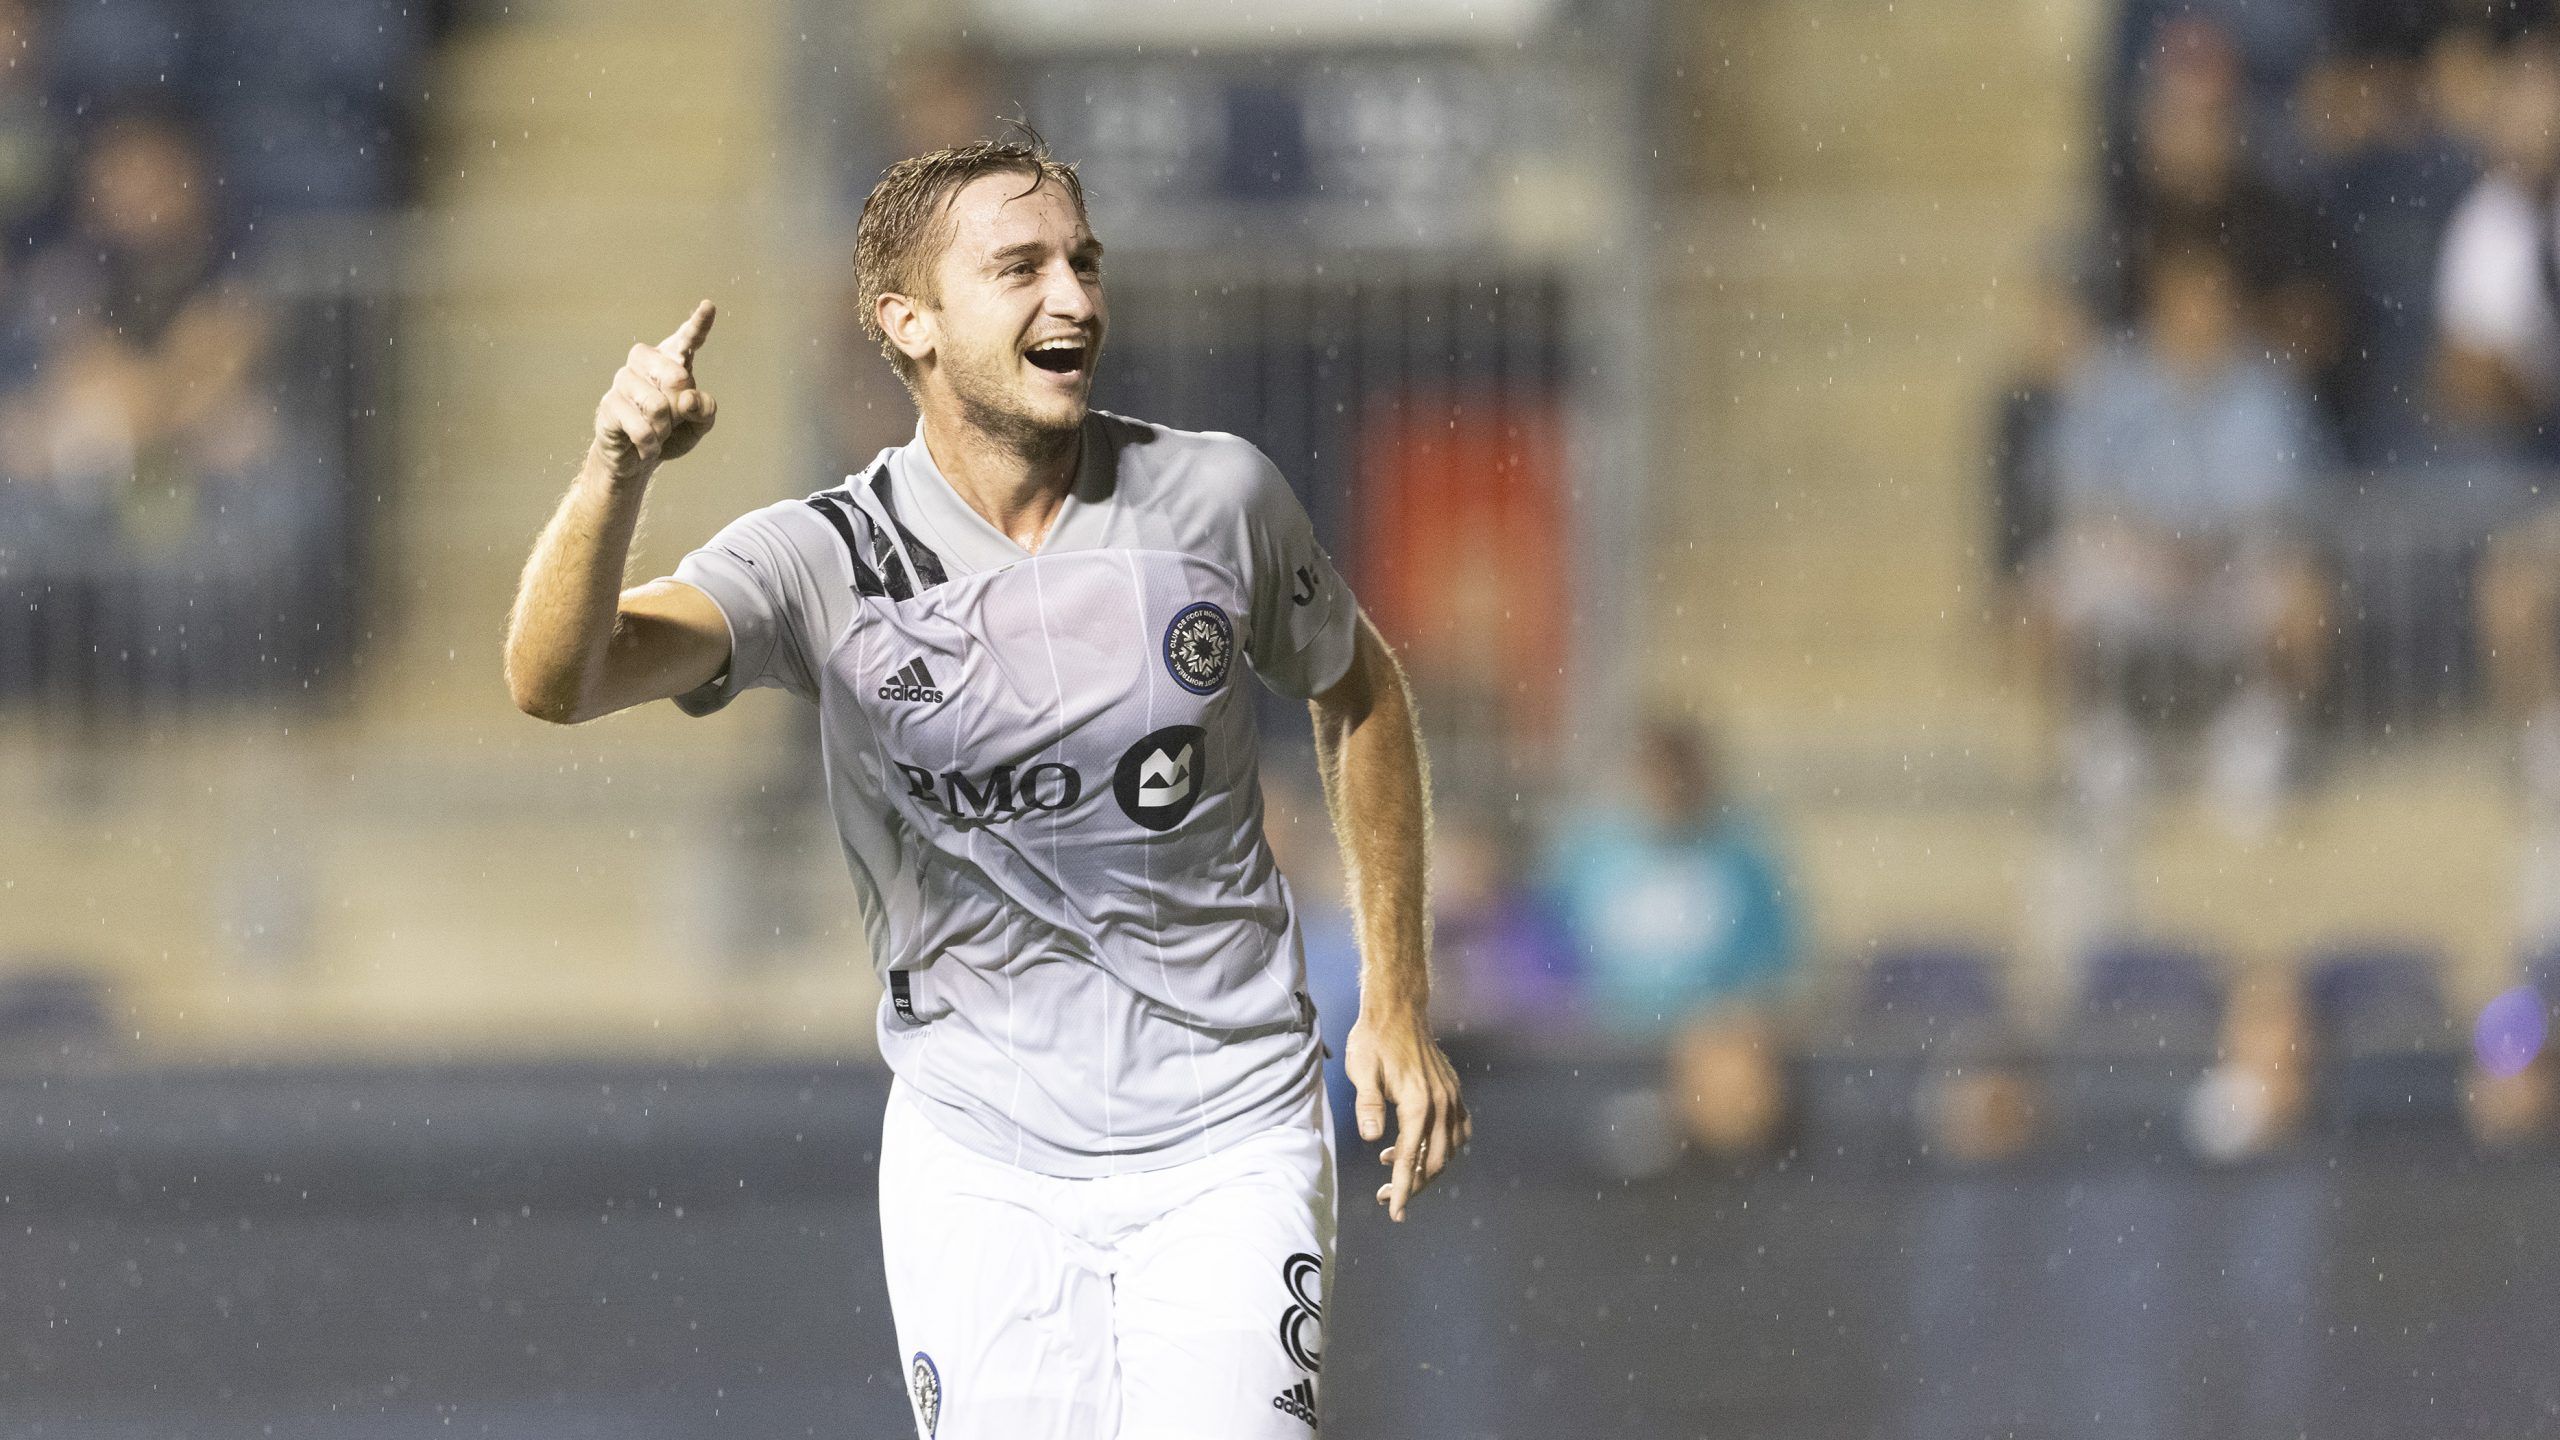 Aug 21, 2021; Chester, Pennsylvania, USA; CF Montreal midfielder Djordje Mihailovic (8) reacts after scoring a goal against the Philadelphia Union in the first half at Subaru Park. Mandatory Credit: Mitchell Leff-USA TODAY Sports